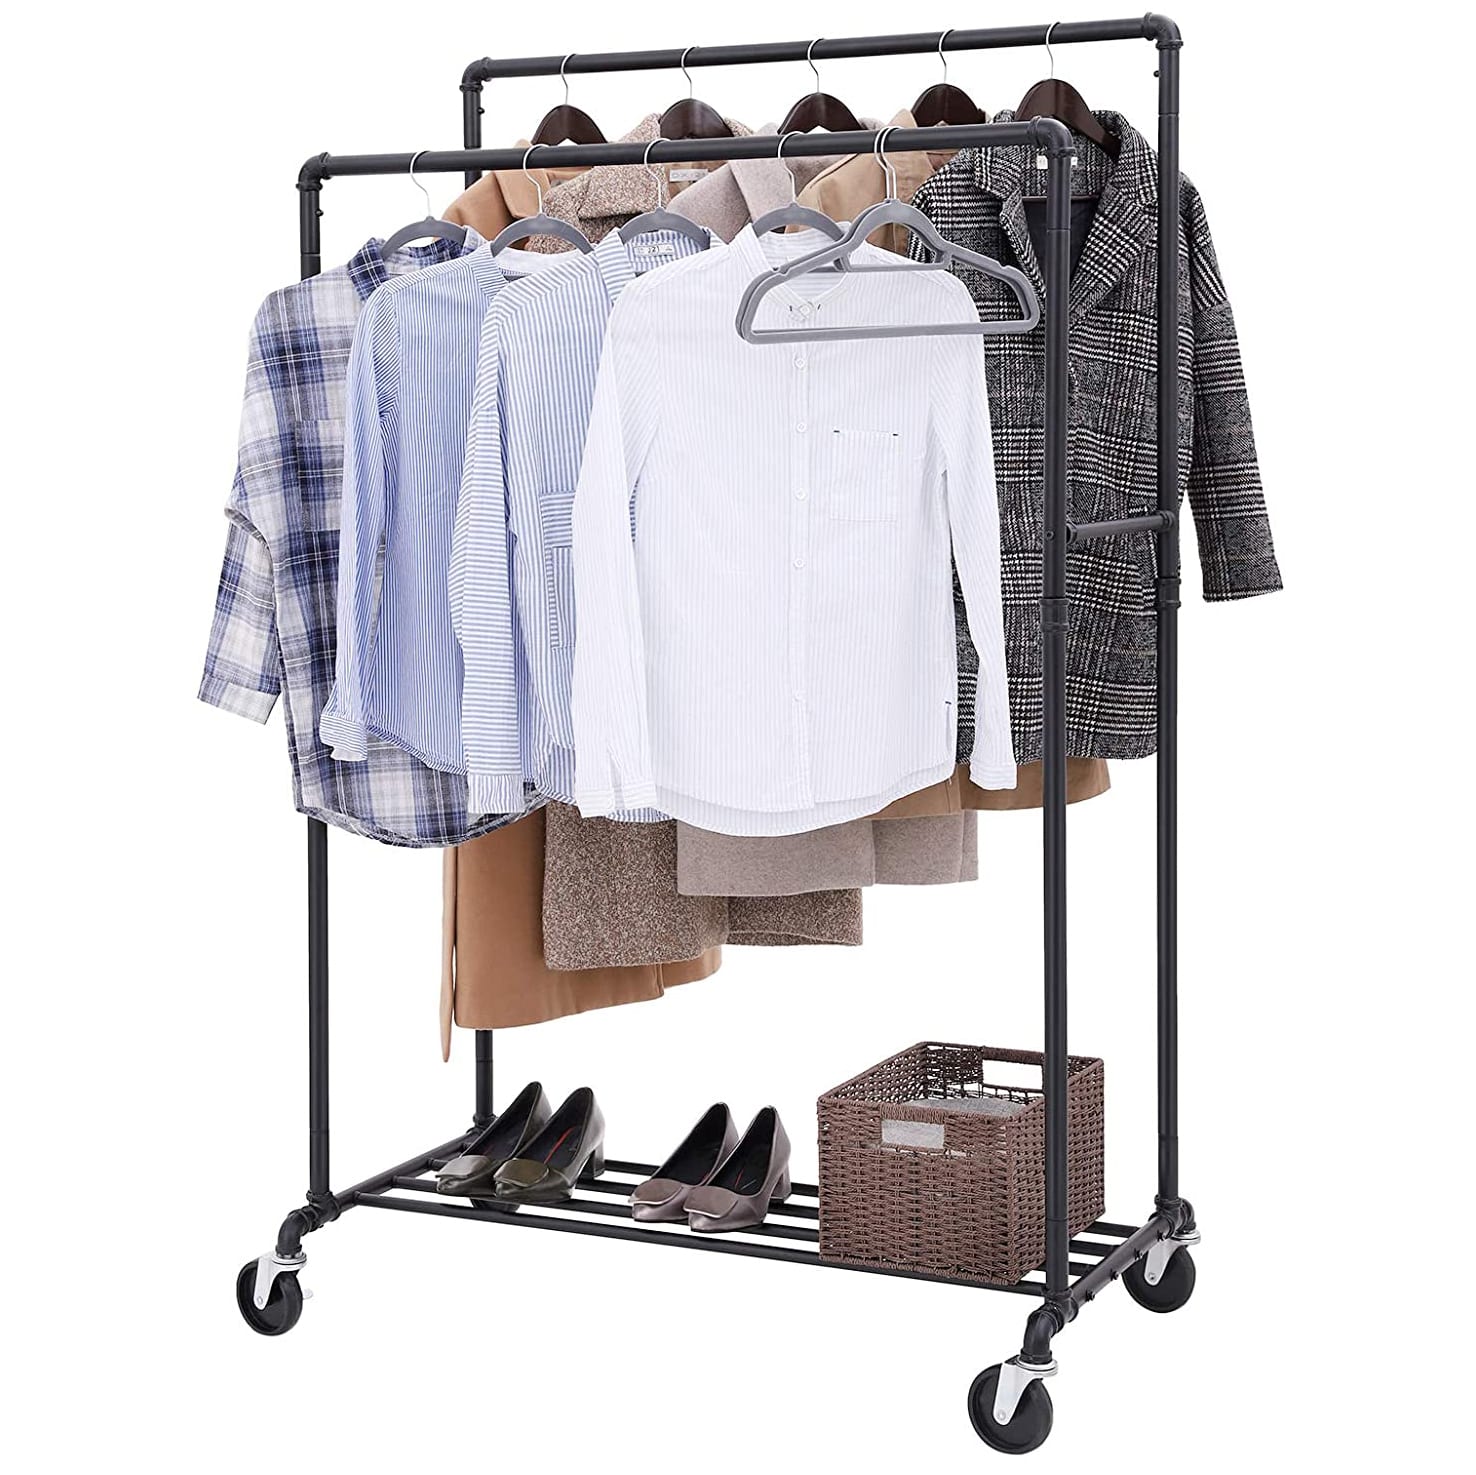 http://cdn.apartmenttherapy.info/image/upload/v1615920660/gen-workflow/product-database/songmics-industrial-pipe-clothes-rack-amazon.jpg